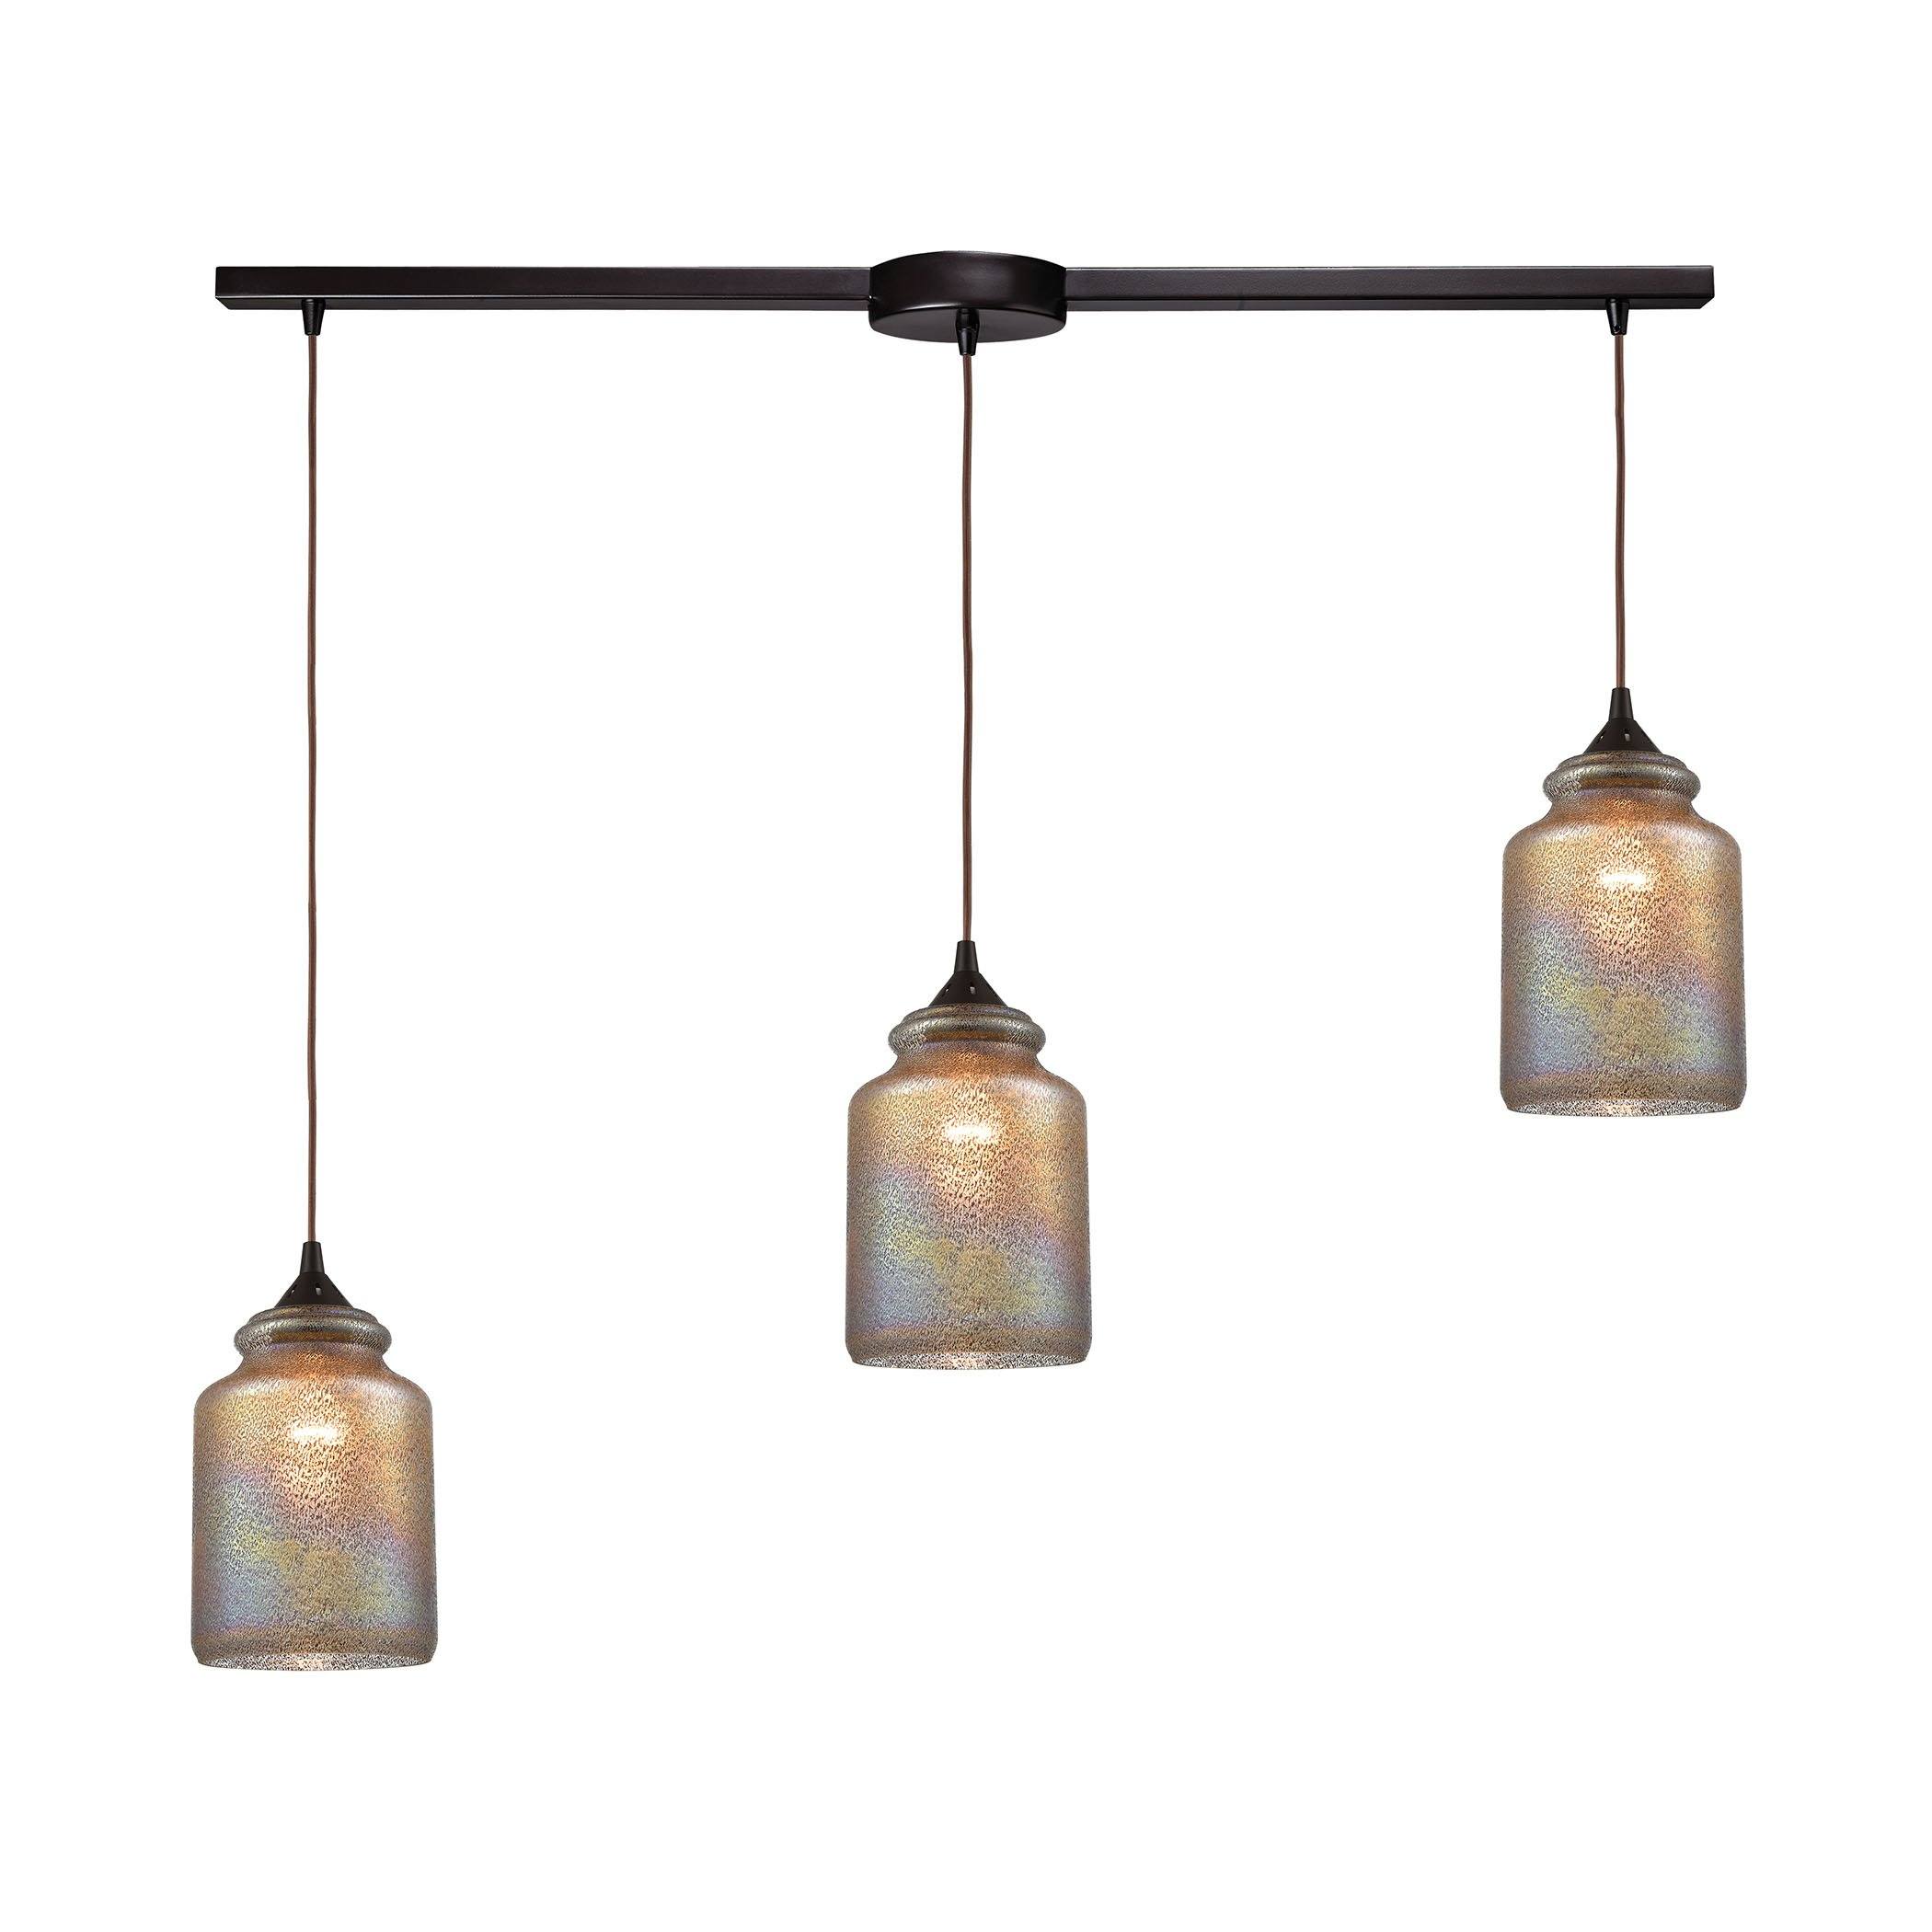 Illuminessence 3-Light Pendant in Oil Rubbed Bronze with Textured Gray Dichroic Glass Ceiling Elk Lighting 